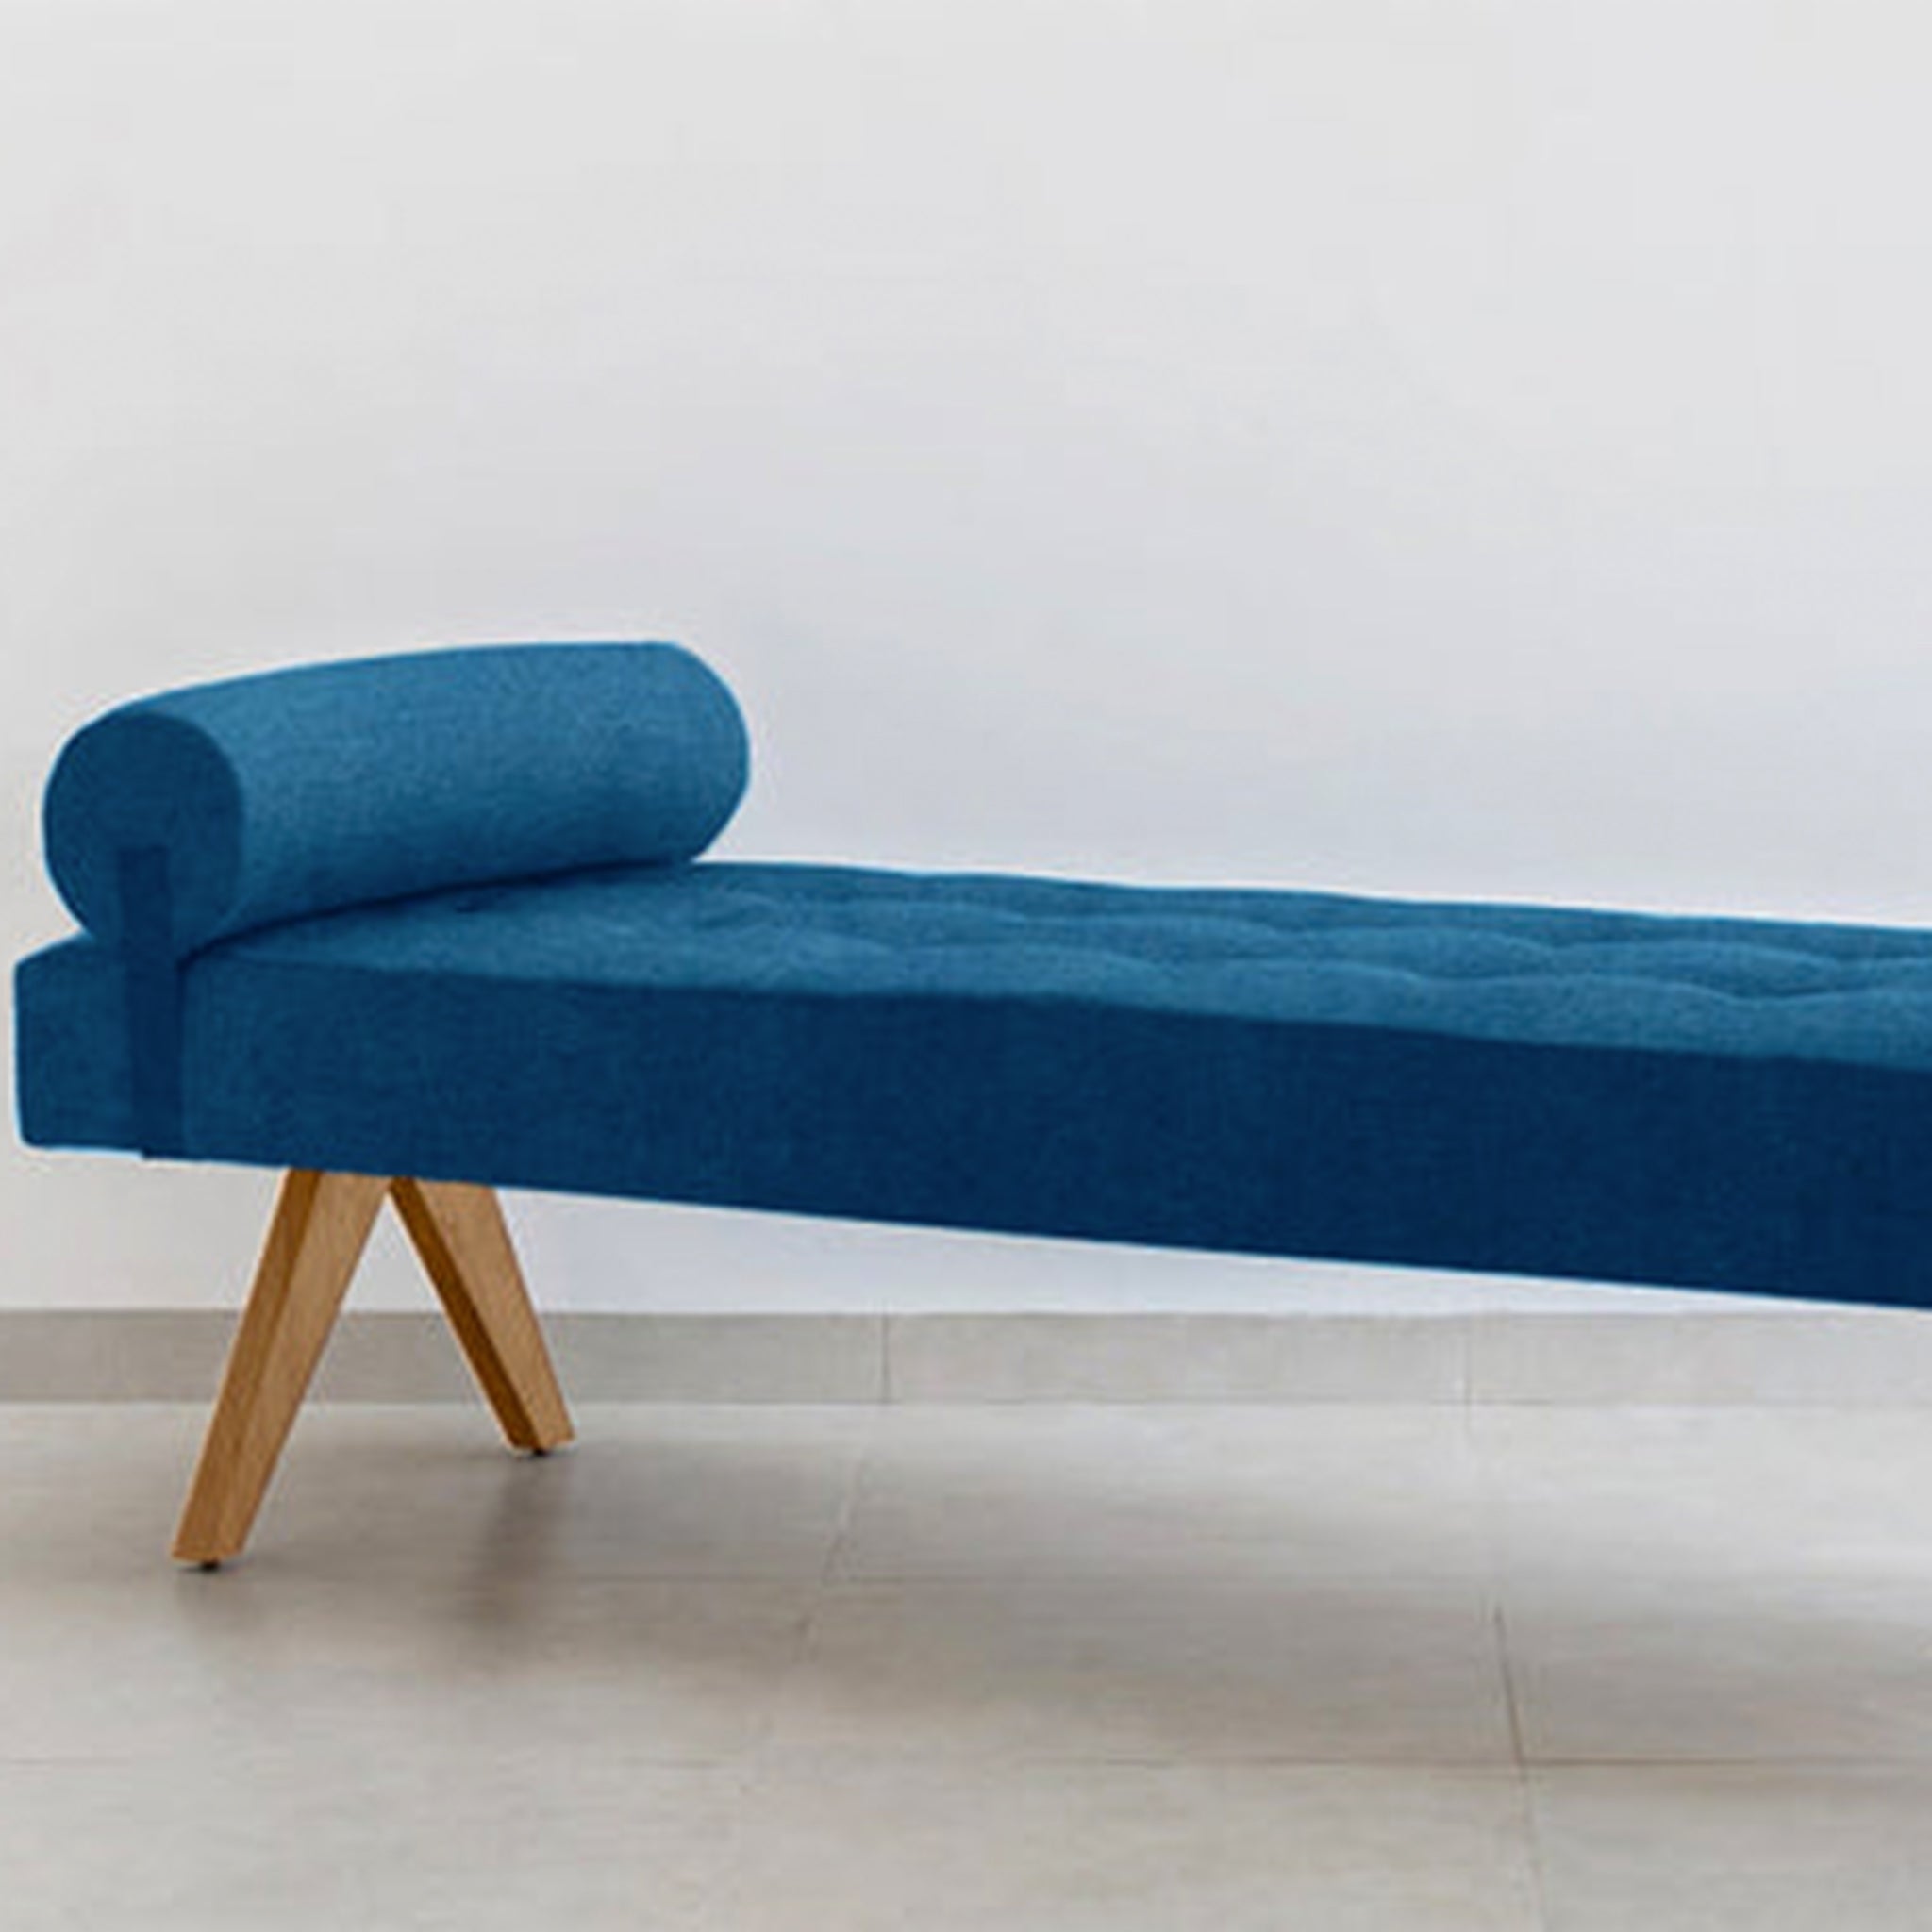 The Jack Daybed for a stylish guest room